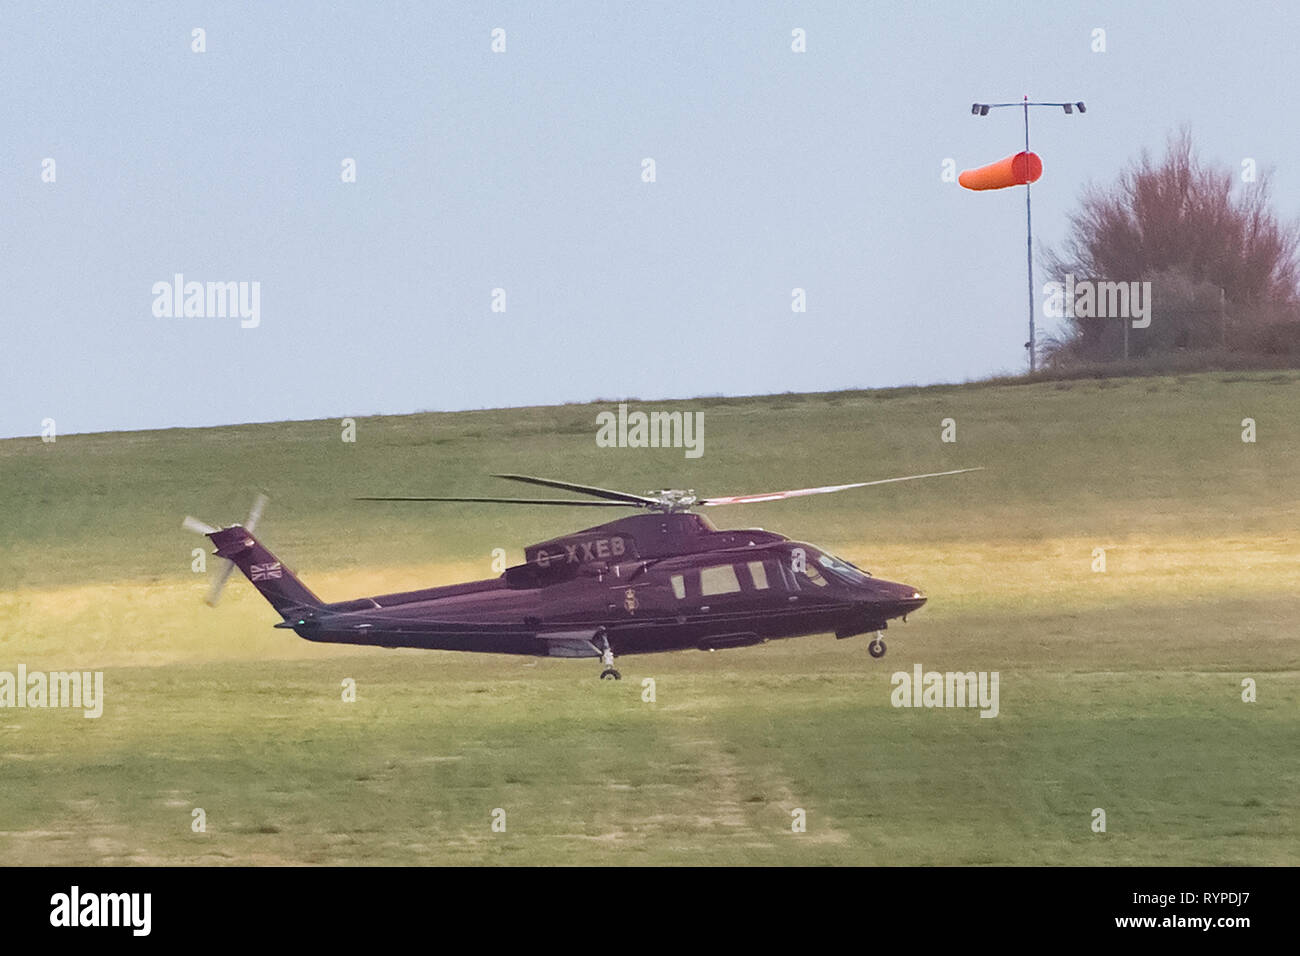 Leeds, UK. 14th Mar, 2019. The Queen's helicopter (registered G-XXEB) battled strong winds to land at Leeds Bradford Airport this afternoon. It is not known whether a member of the Royal Family was on board the helicopter but, according to the Royal Calendar, Prince Edward is carrying out official engagements in West Yorkshire today. Credit: James Copeland/Alamy Live News Stock Photo